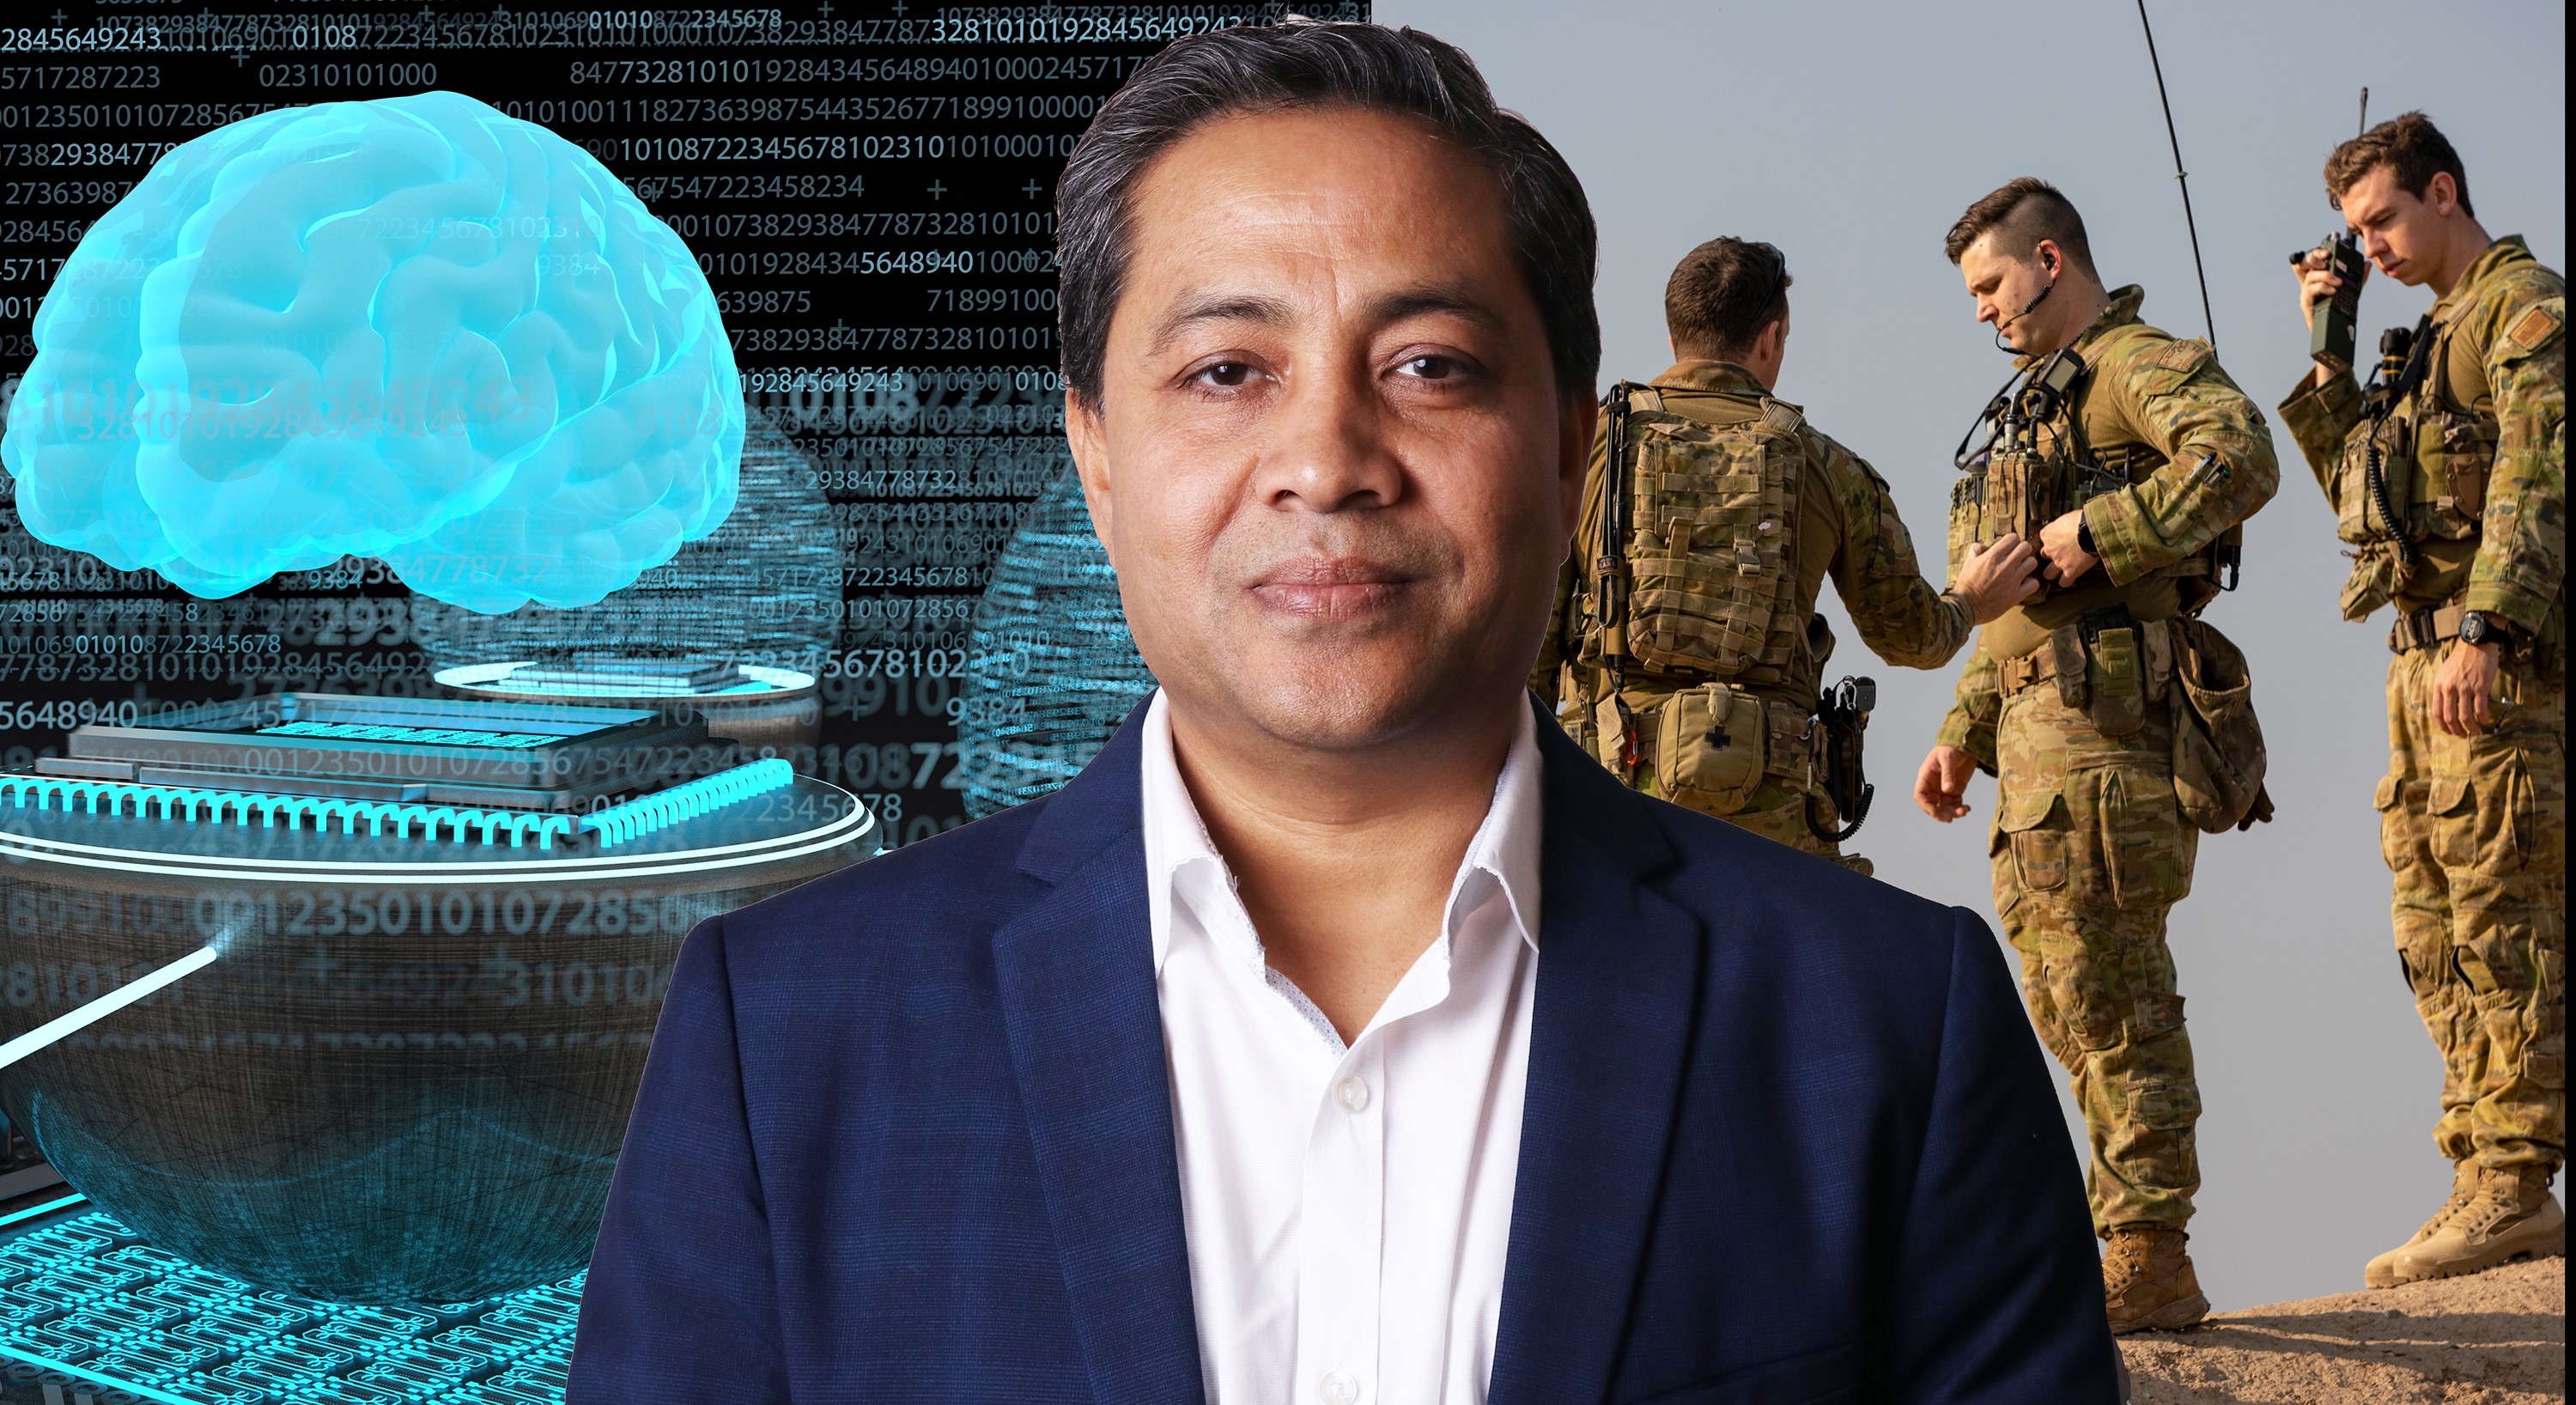 Dr Ismail Shakeel recently completed a Chief Defence Scientist (CDS) Fellowship, during which he made significant contributions to the field of "Trainable Radios" that use artificial intelligence to autonomously optimise radio frequency (RF) communications in contested environments.